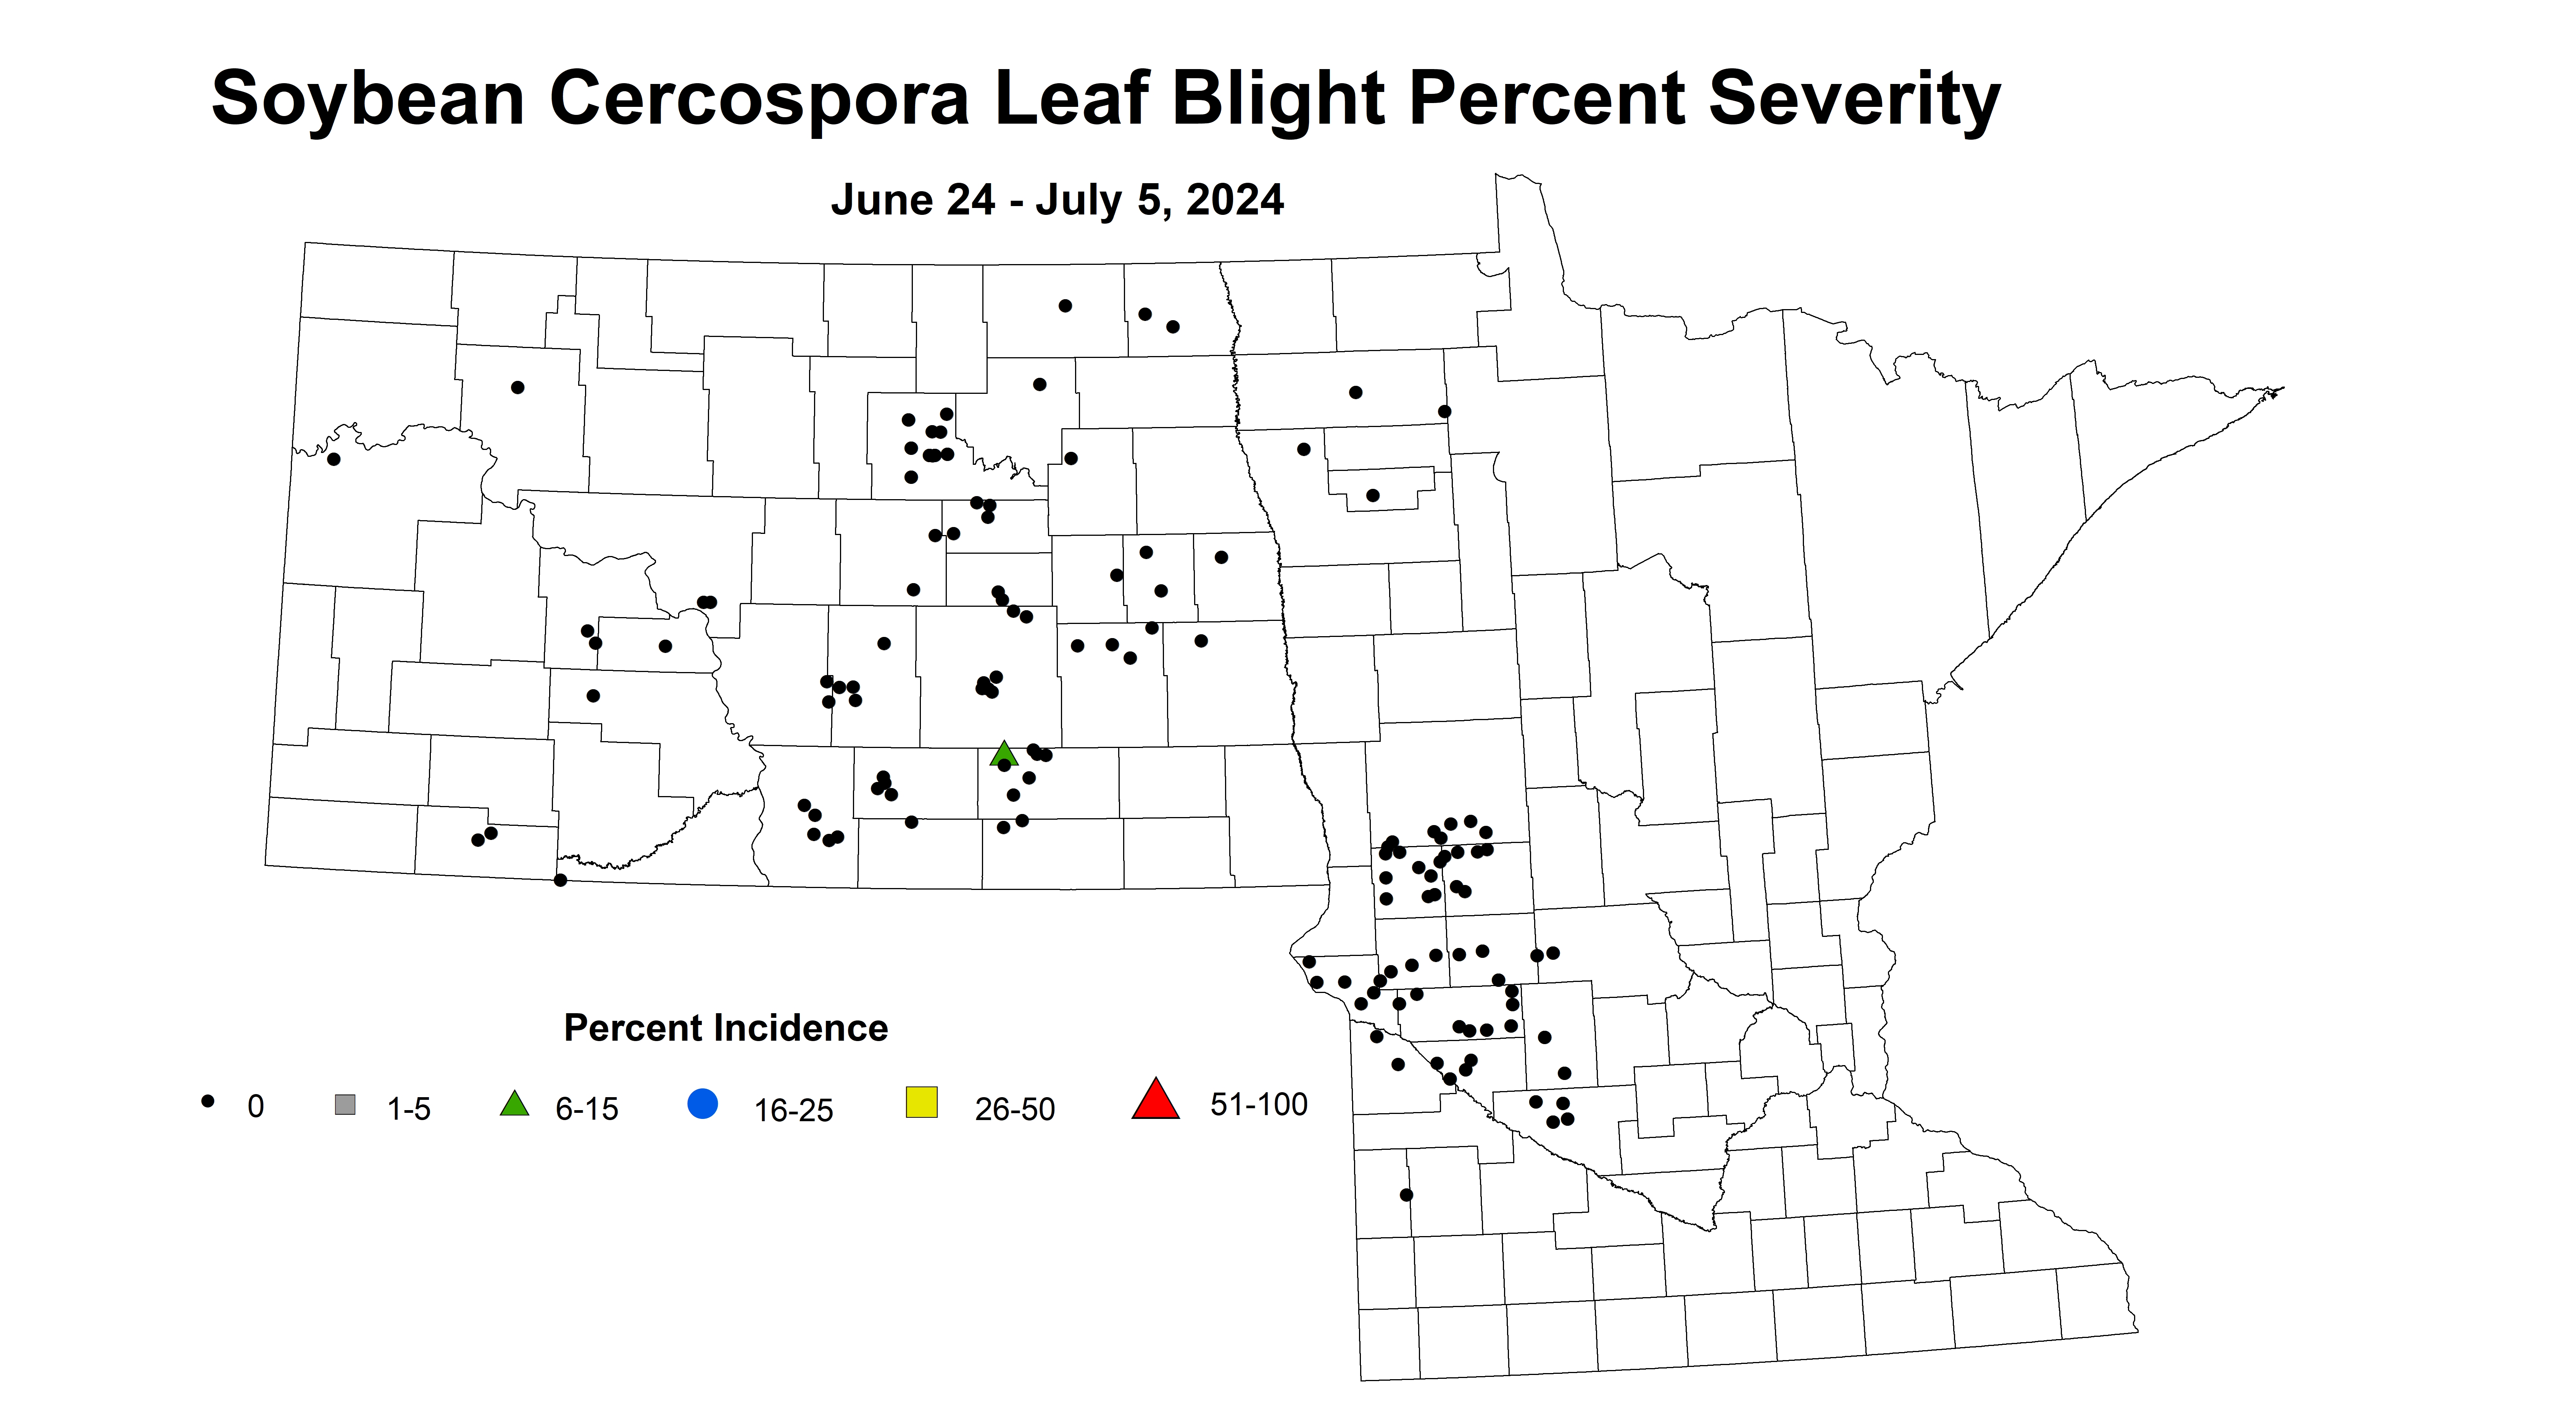 soybean cercospora leaf blight percent severity June 24 to July 5 2024